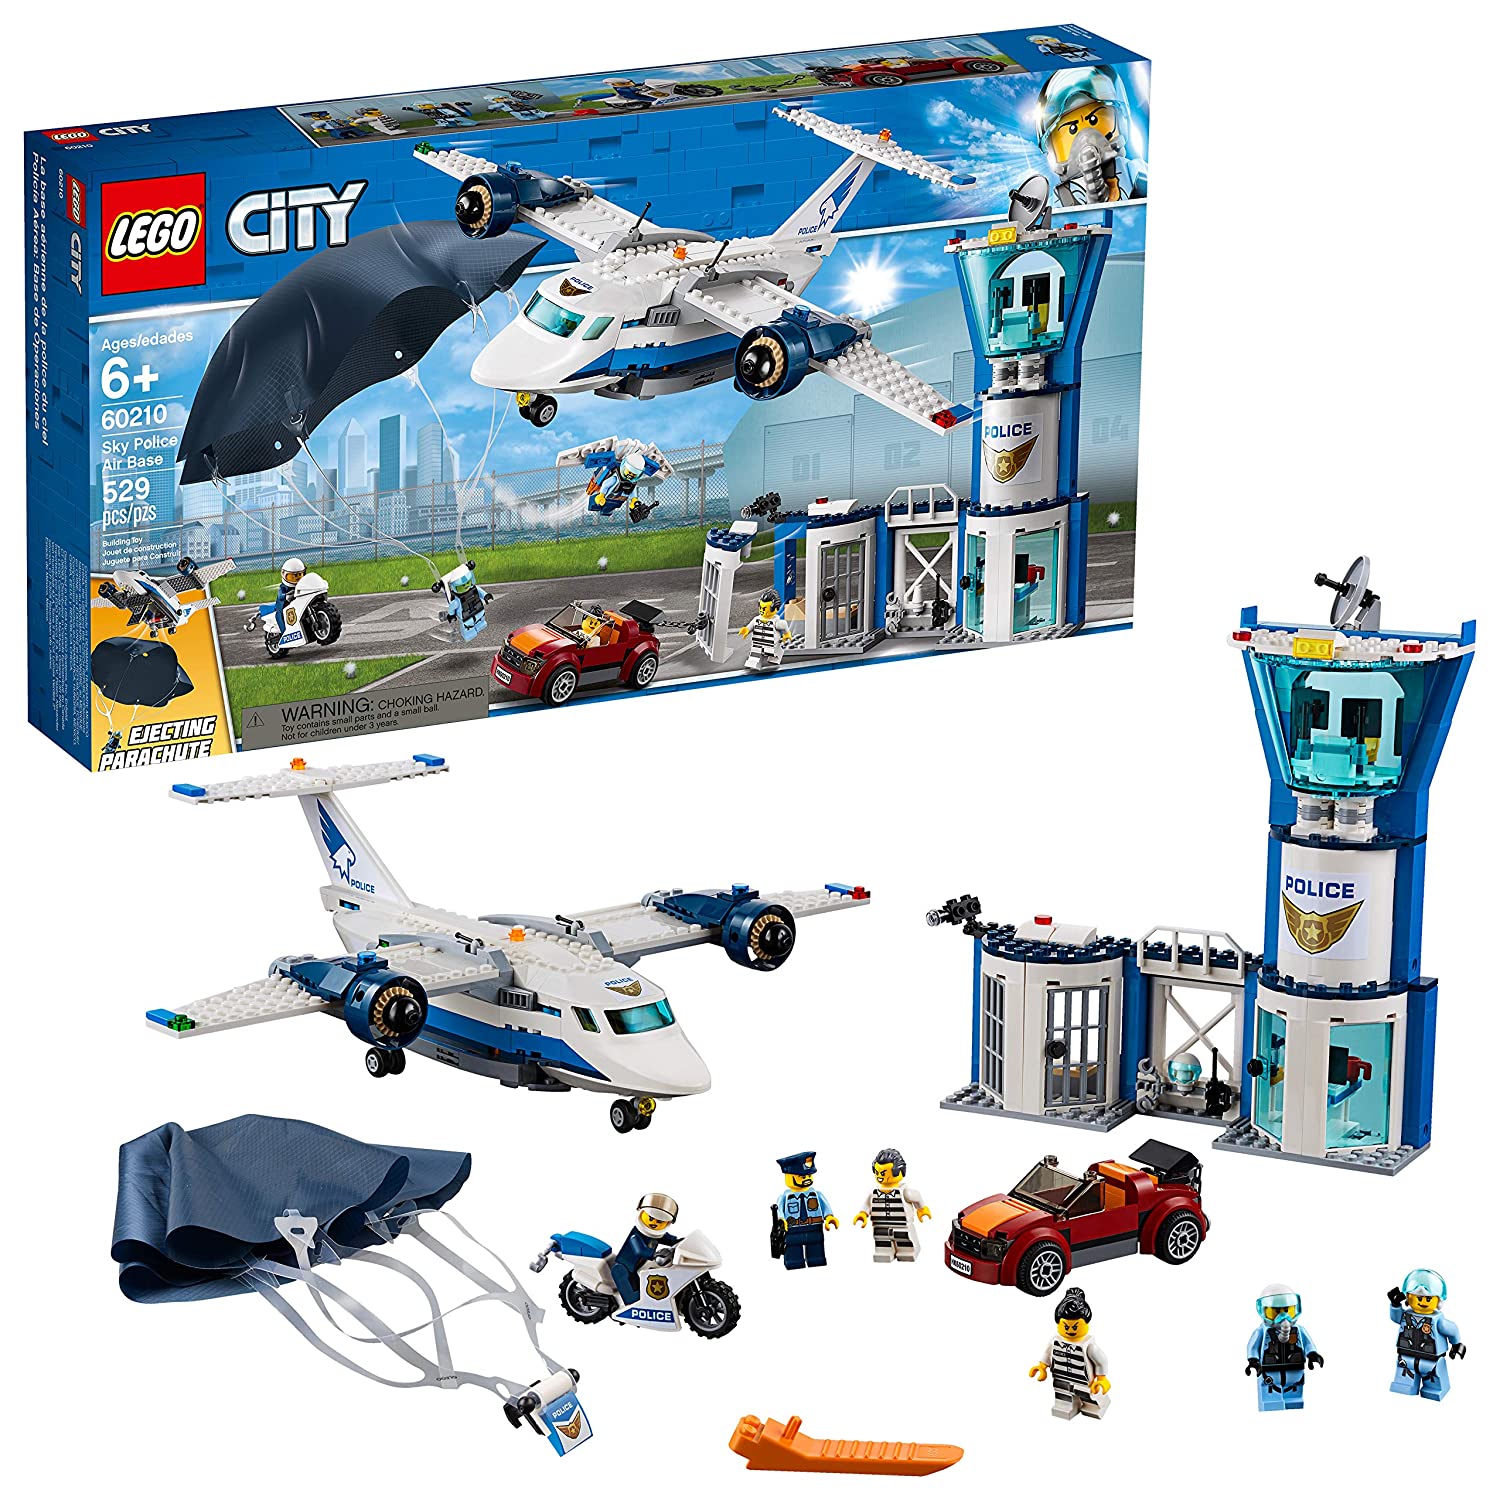 9 Best LEGO Police Station Set 2022 - Buying Guide & Reviews 8